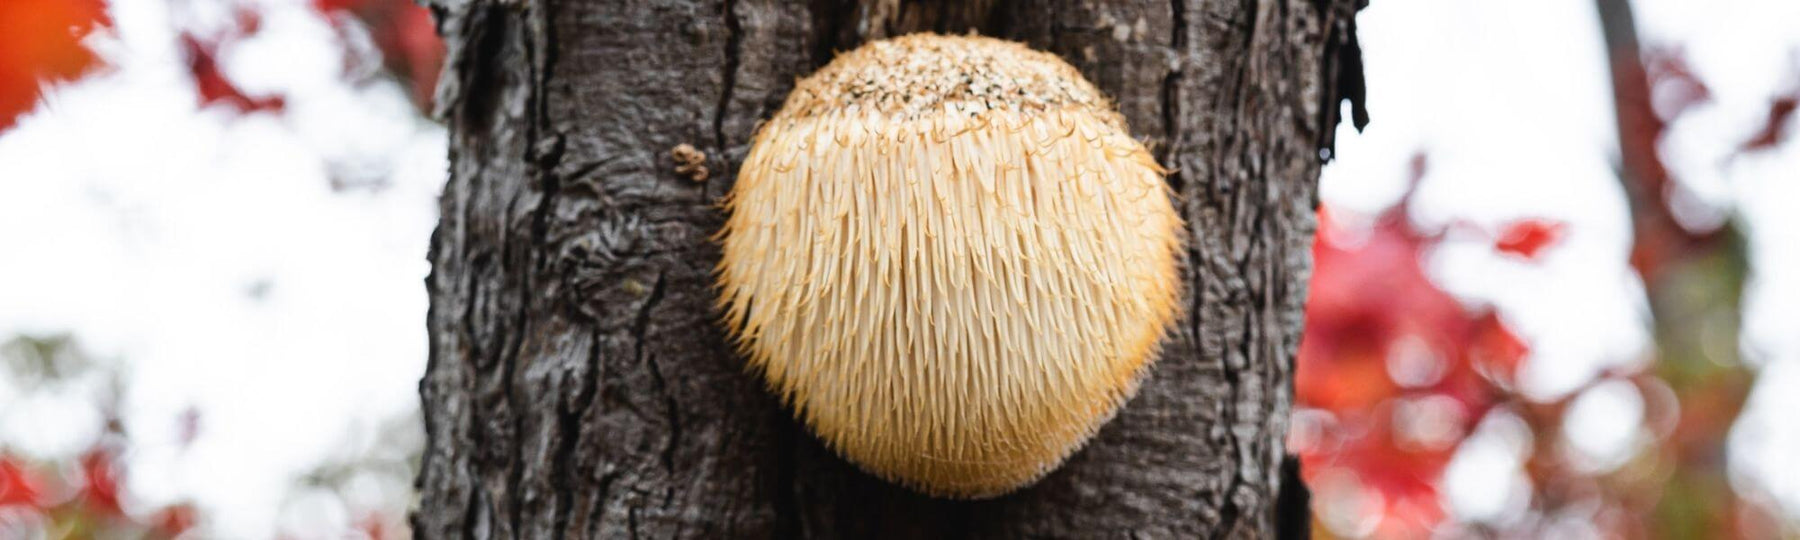 What Are The Health Benefits Of Lion's Mane Mushroom?